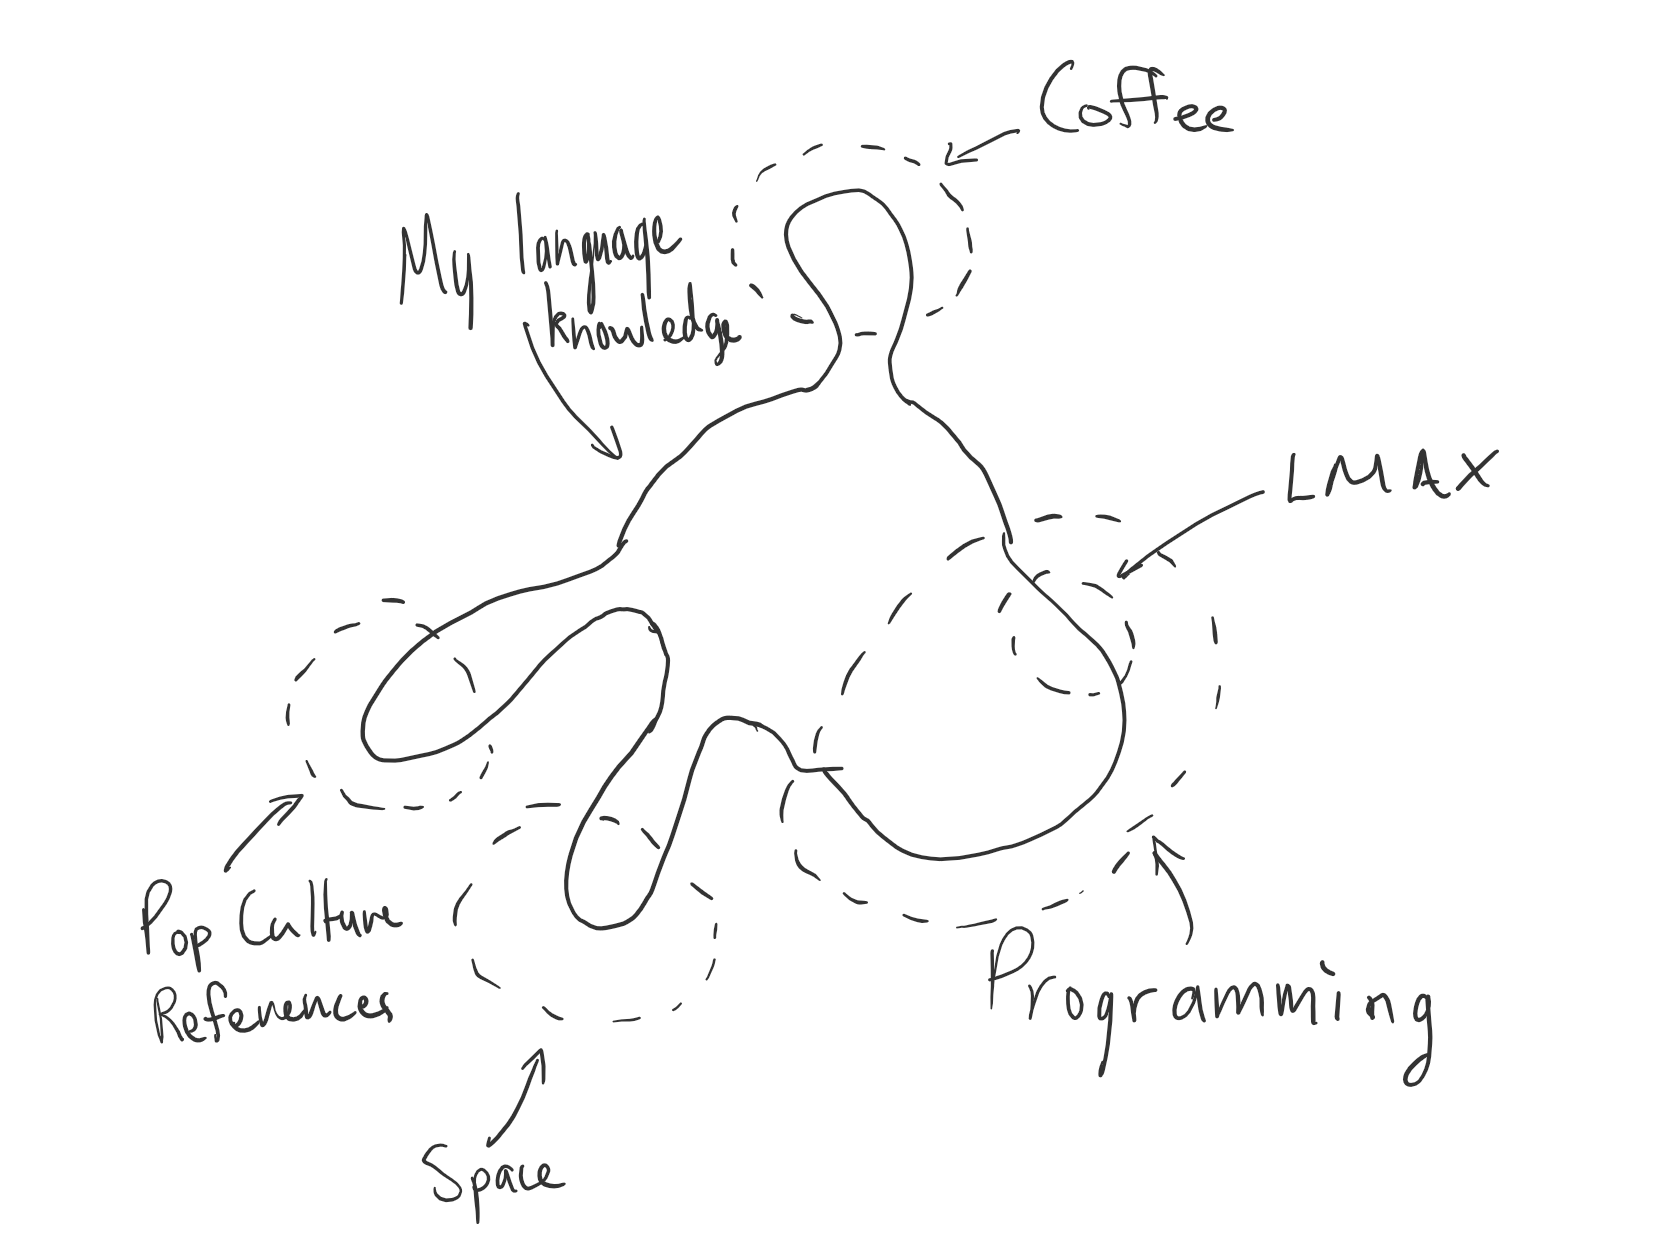 A blob of my personal language knowledge, highlighting areas like programming 
and coffee